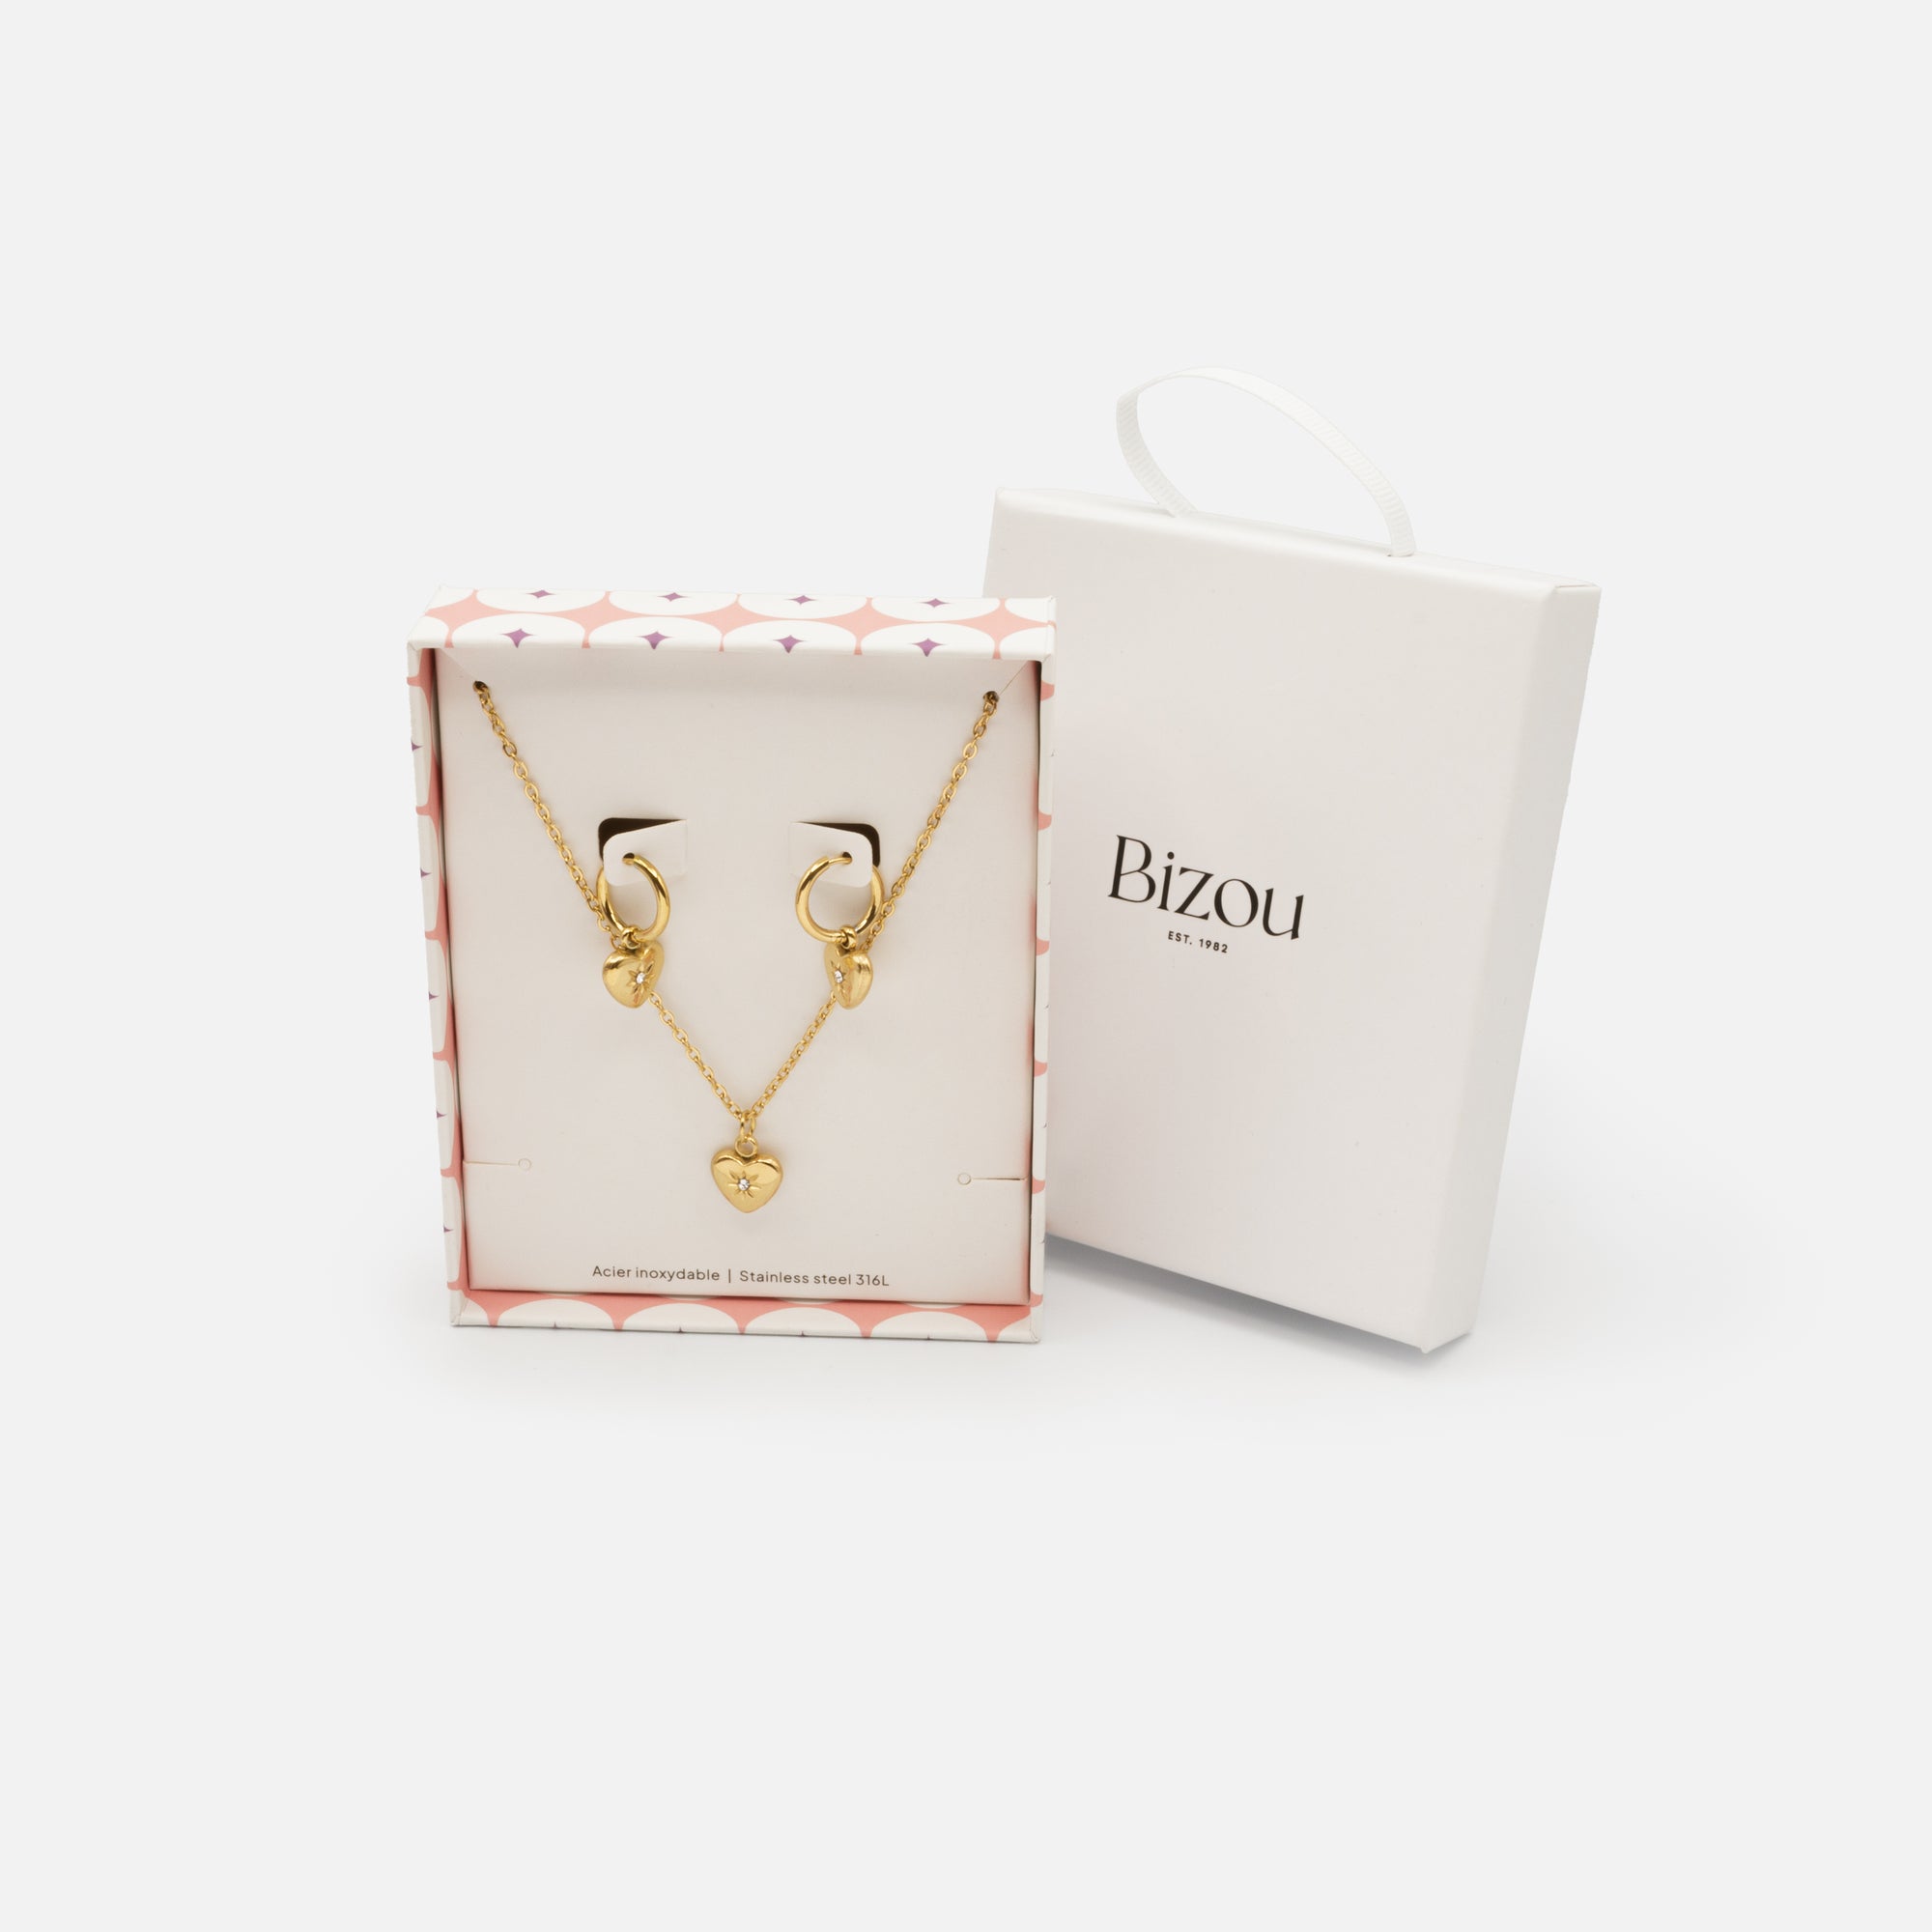 Gold heart and cubic zirconia necklace and earrings set in stainless steel